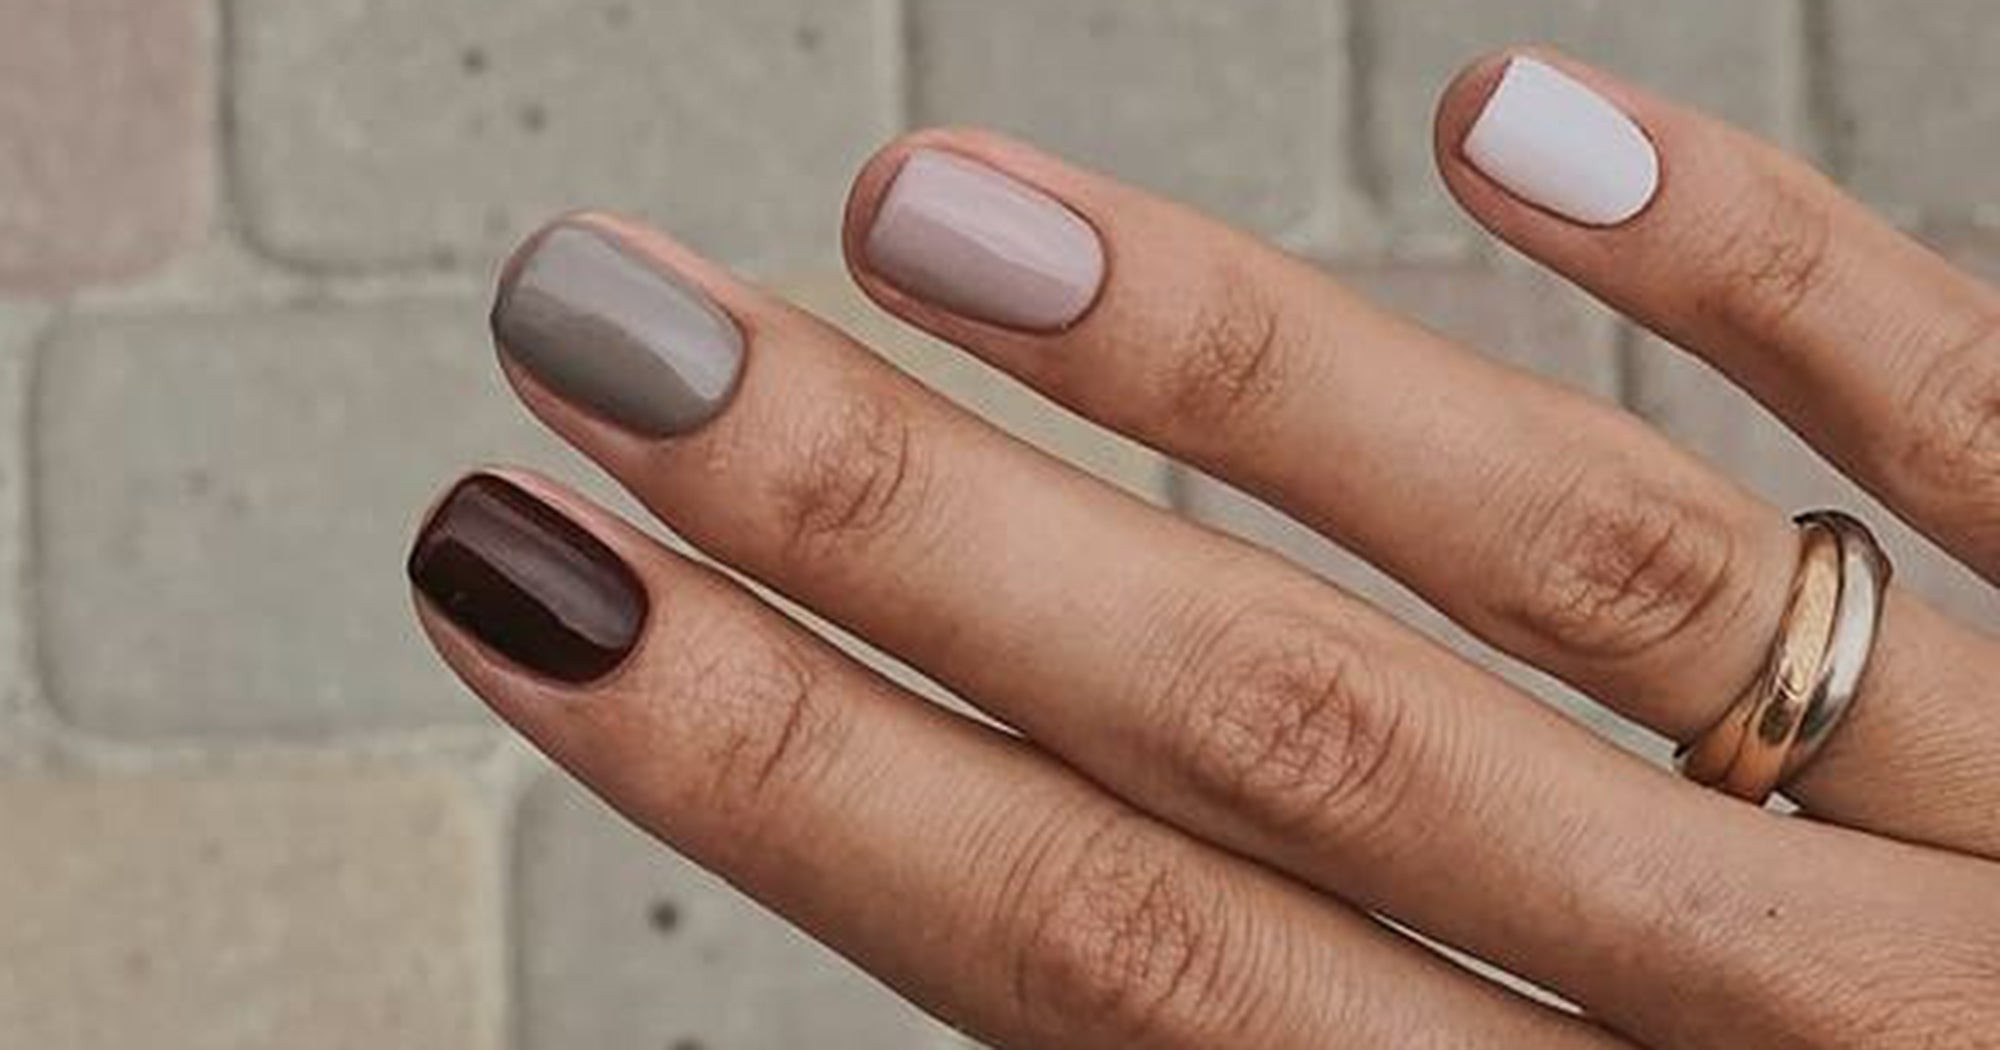 New Fall Nail Colors 2020
 Best Fall Nail Polish Colors For A Trendy Manicure 2019